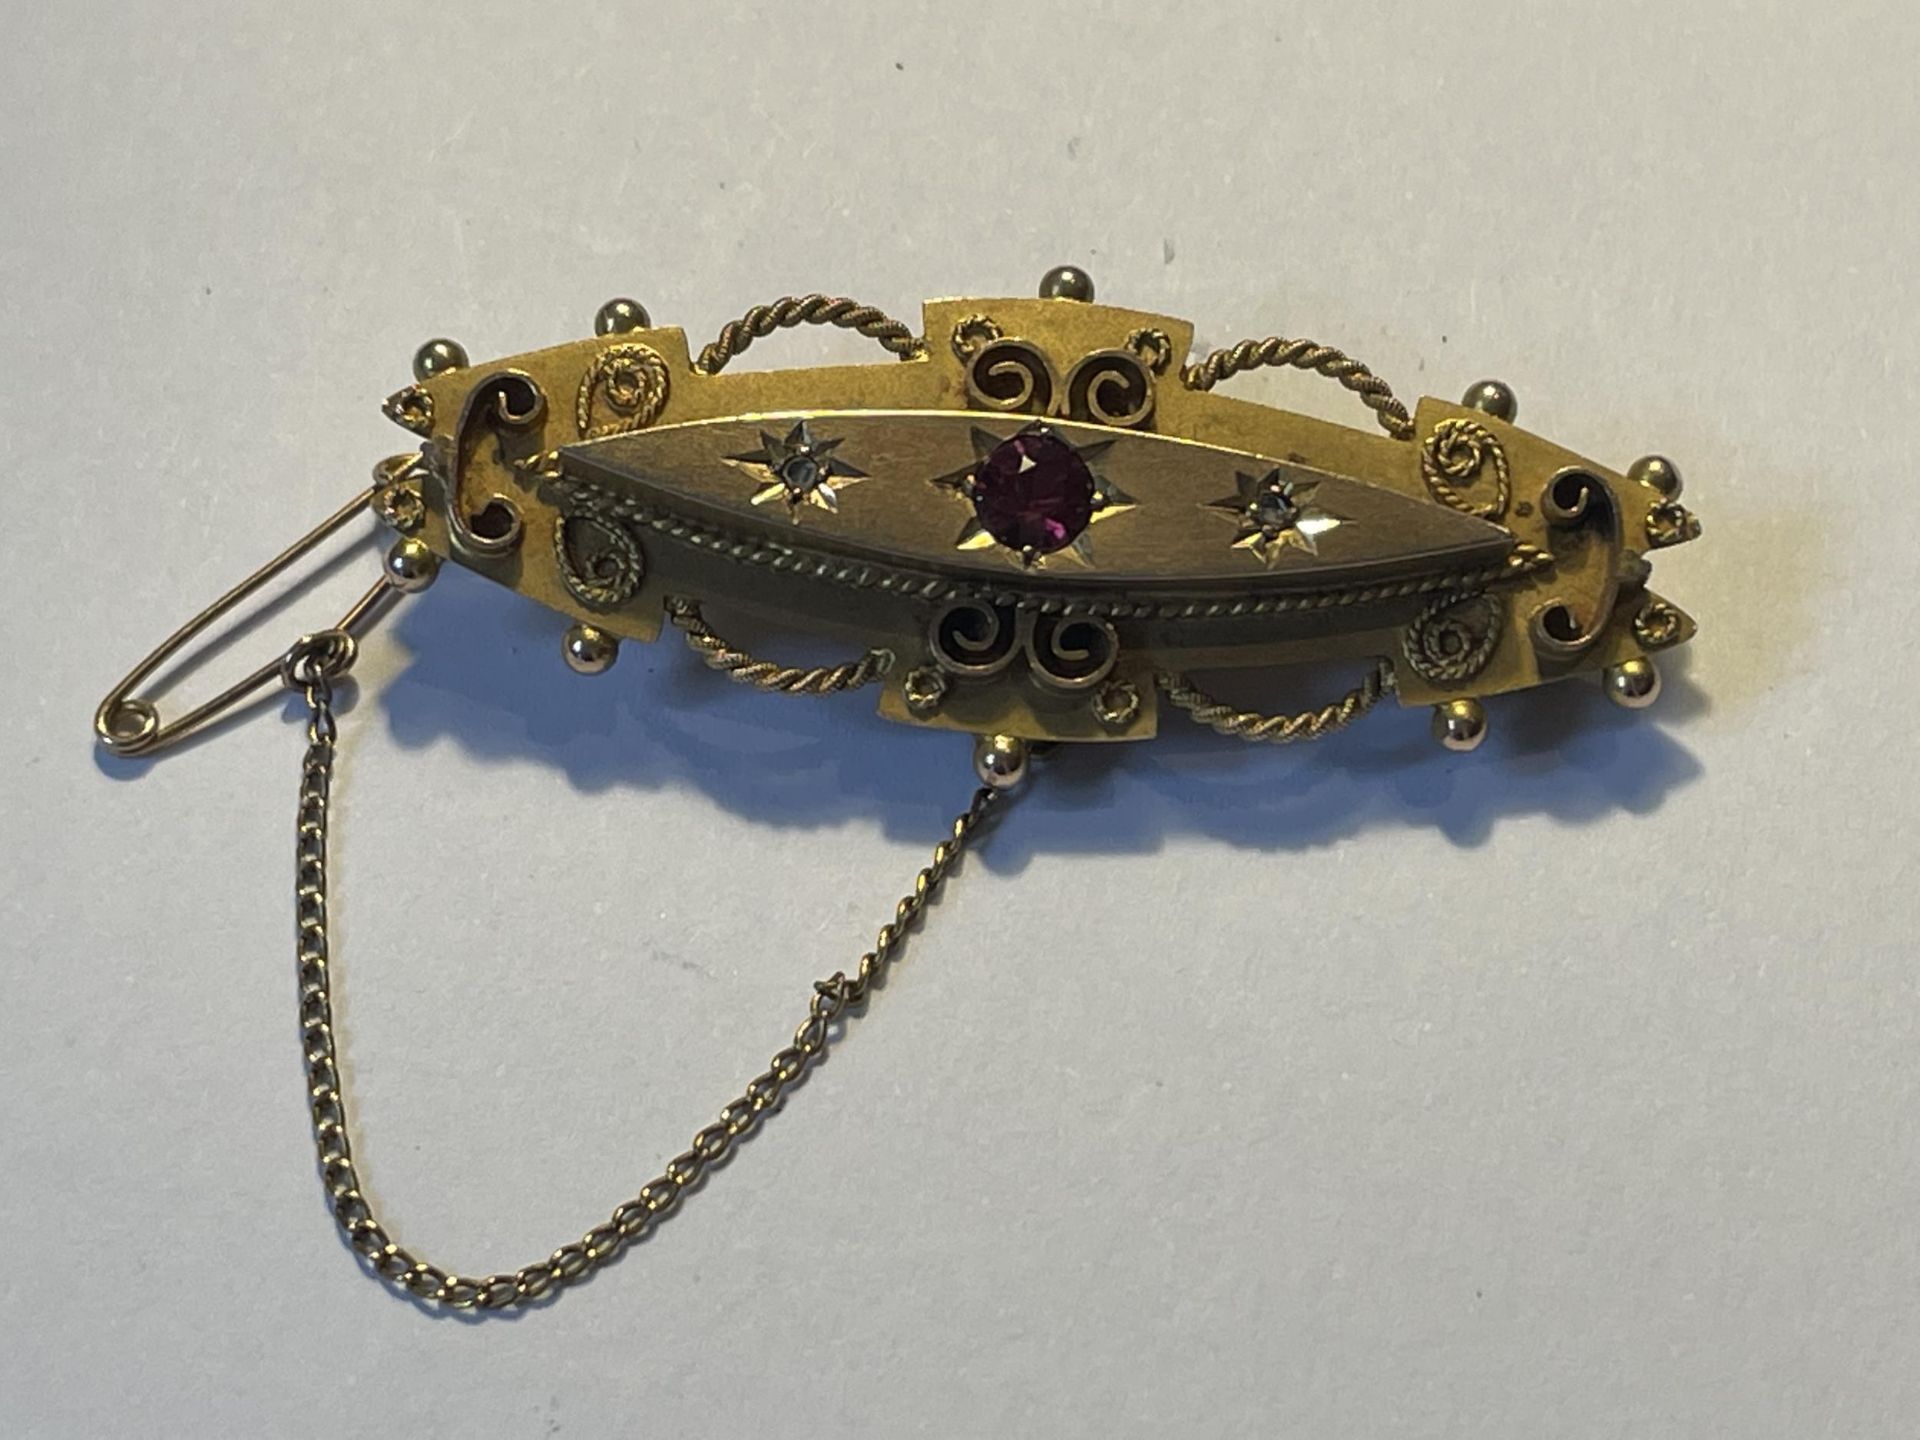 A 9 CARAT GOLD BROOCH WITH A RED STONE GROSS WEIGHT 5.11 GRAMS